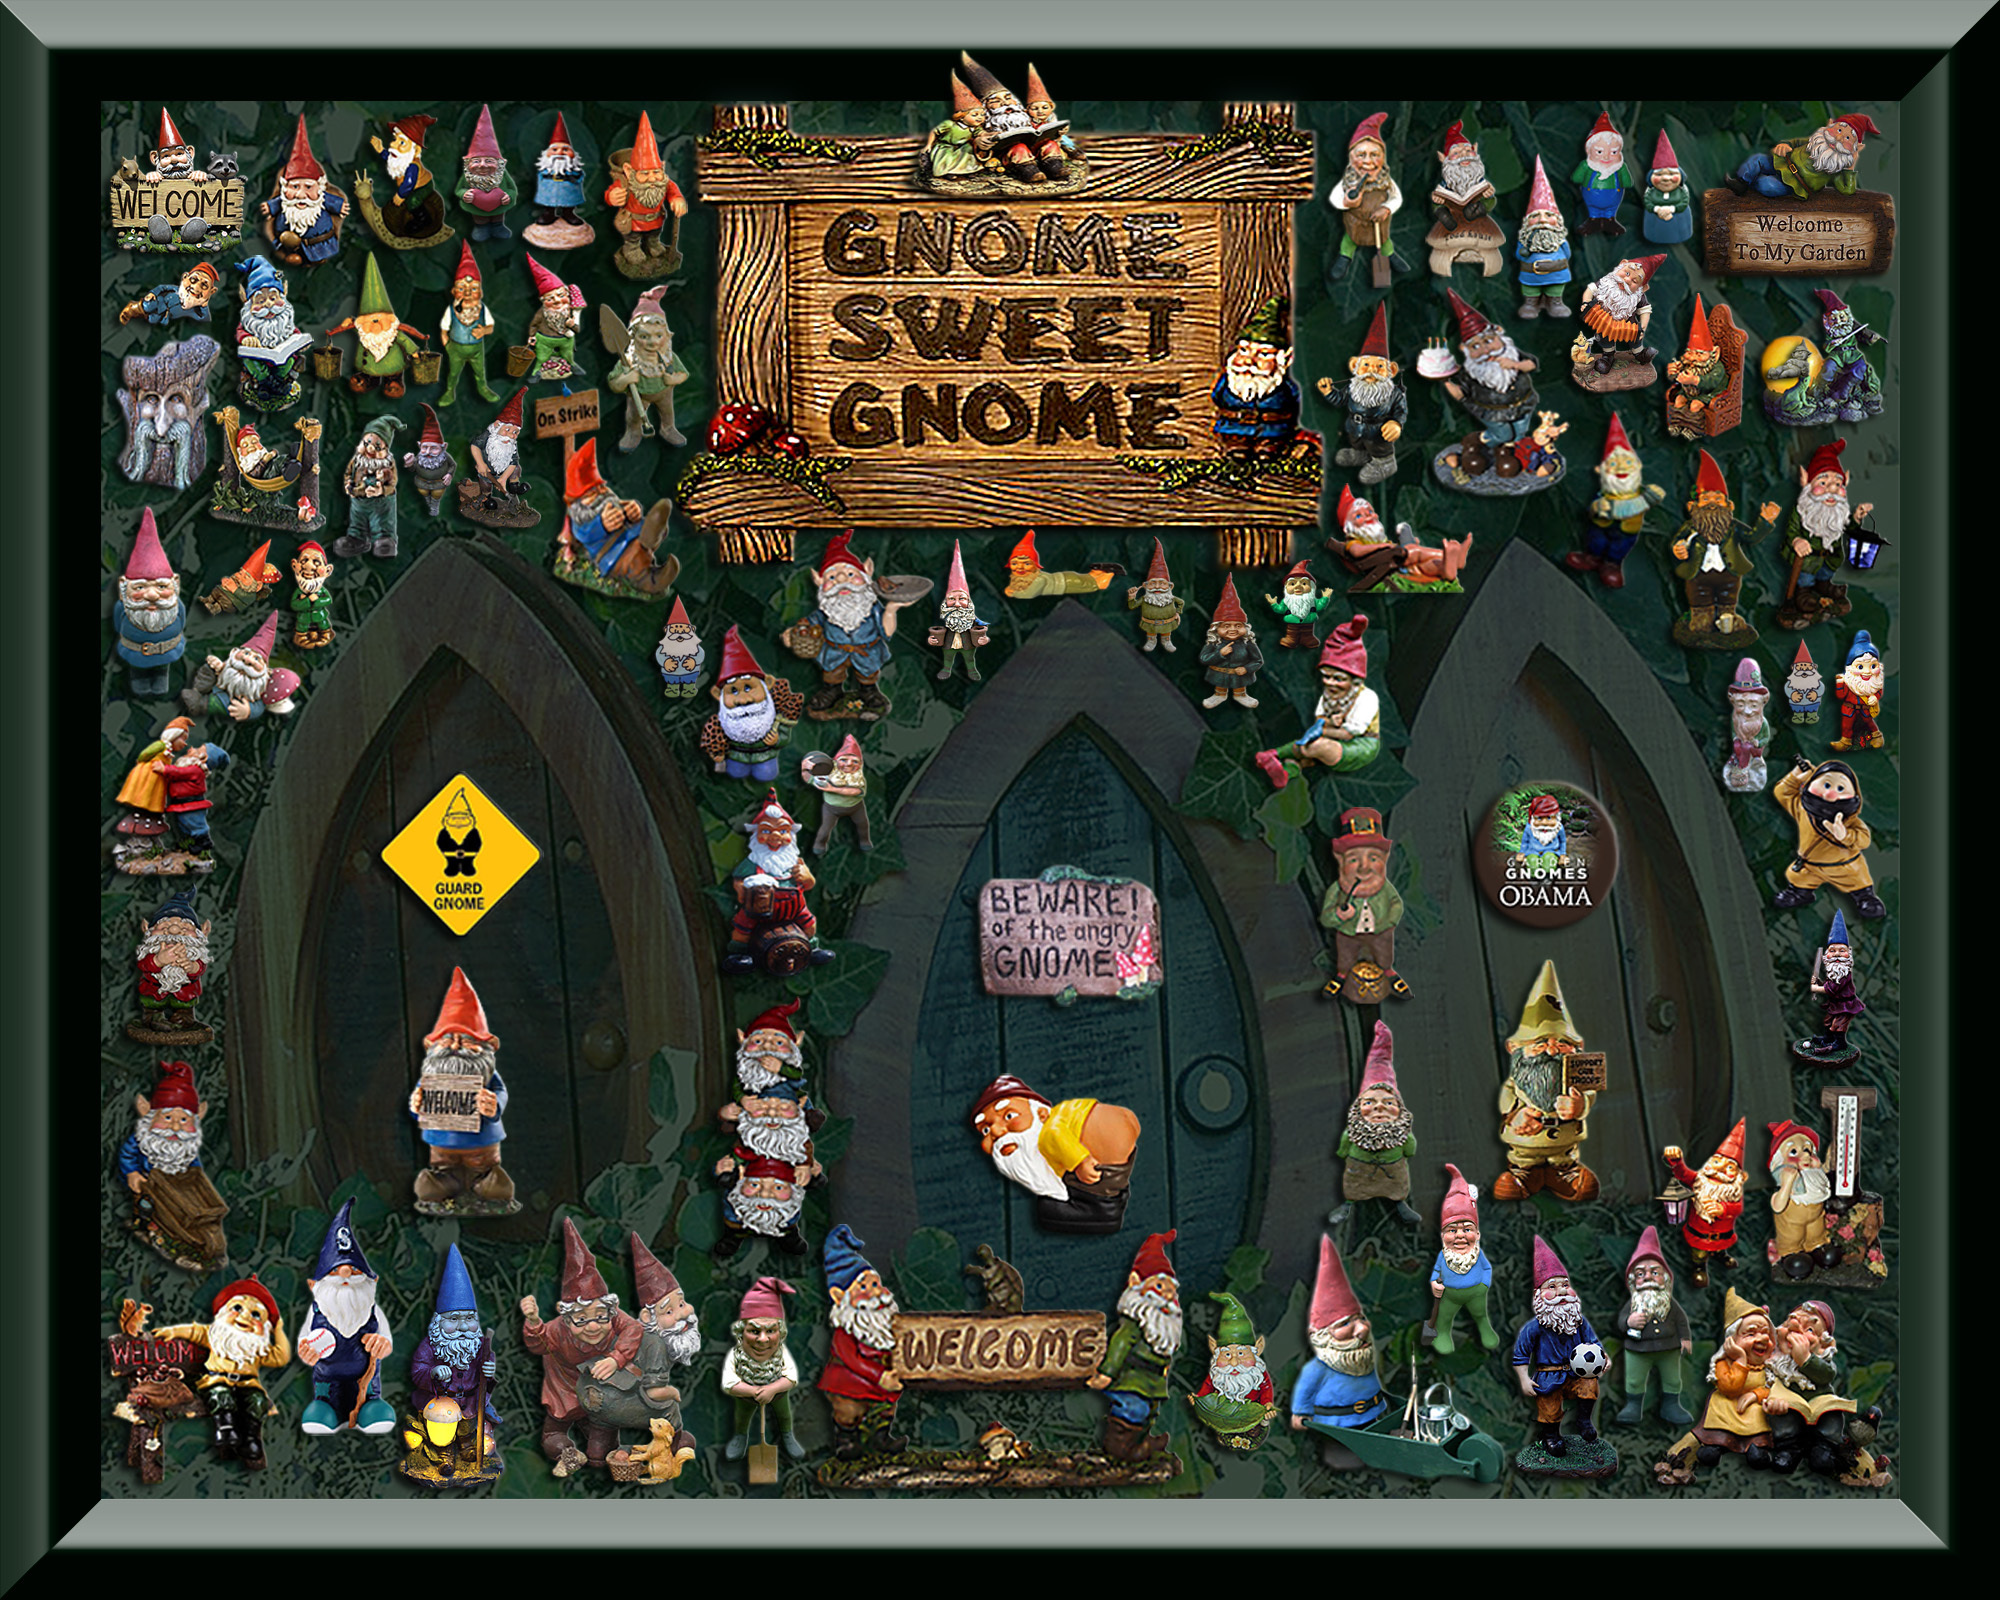 Gnomes Images Gnomes Hd Wallpaper And Background Photos HD Wallpapers Download Free Images Wallpaper [wallpaper981.blogspot.com]